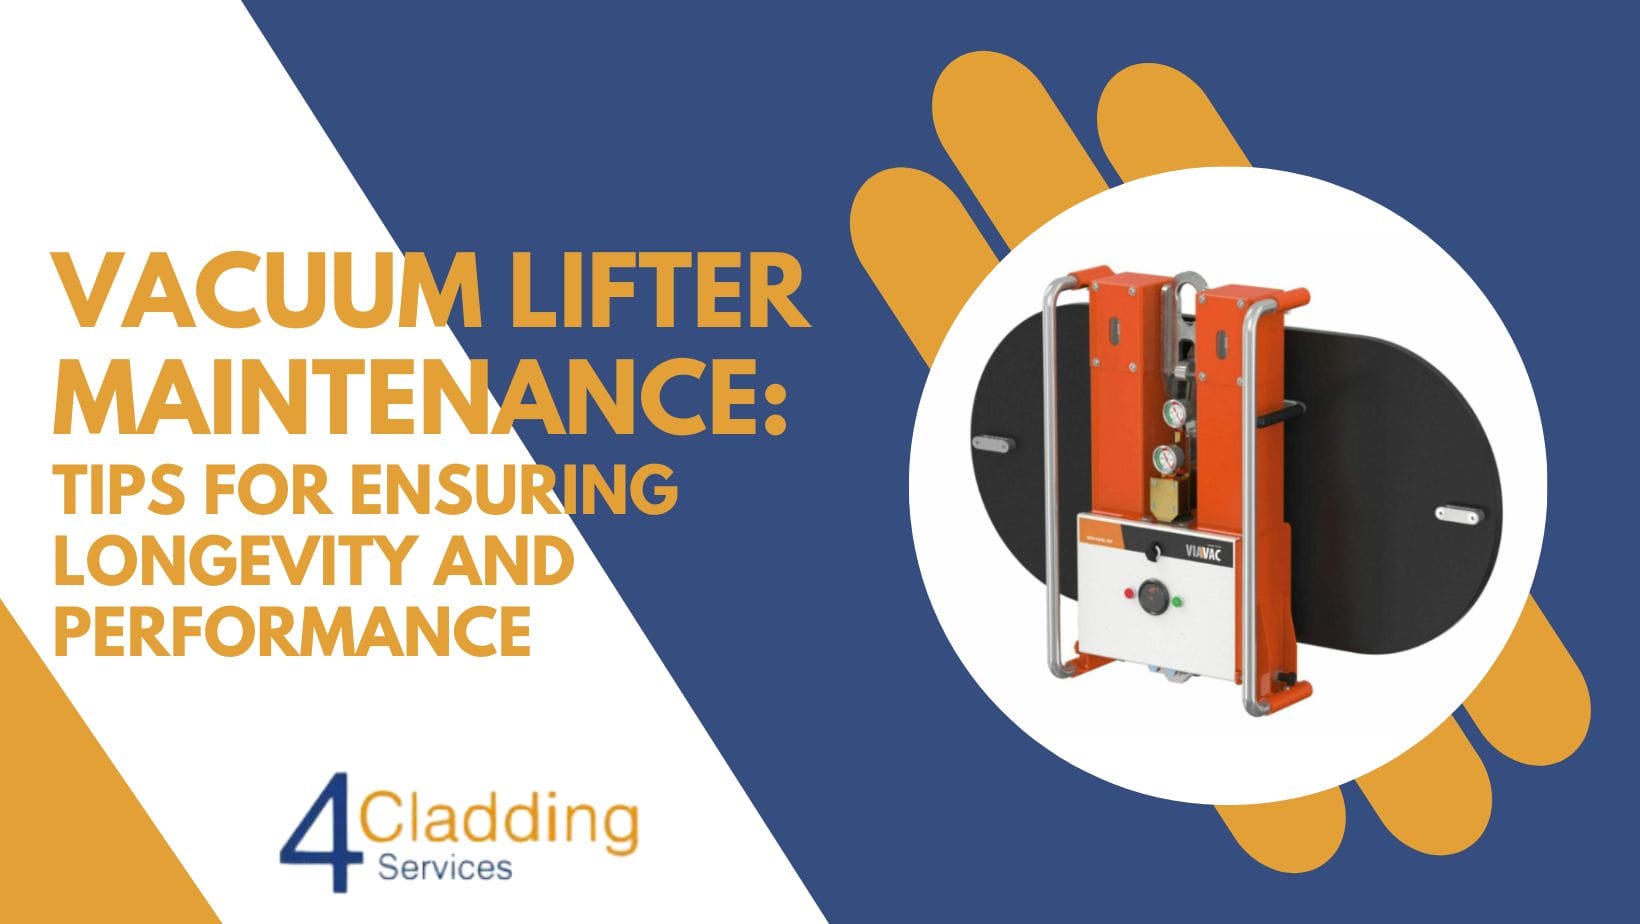 Vacuum Lifter Maintenance: Tips for Ensuring Longevity and Performance